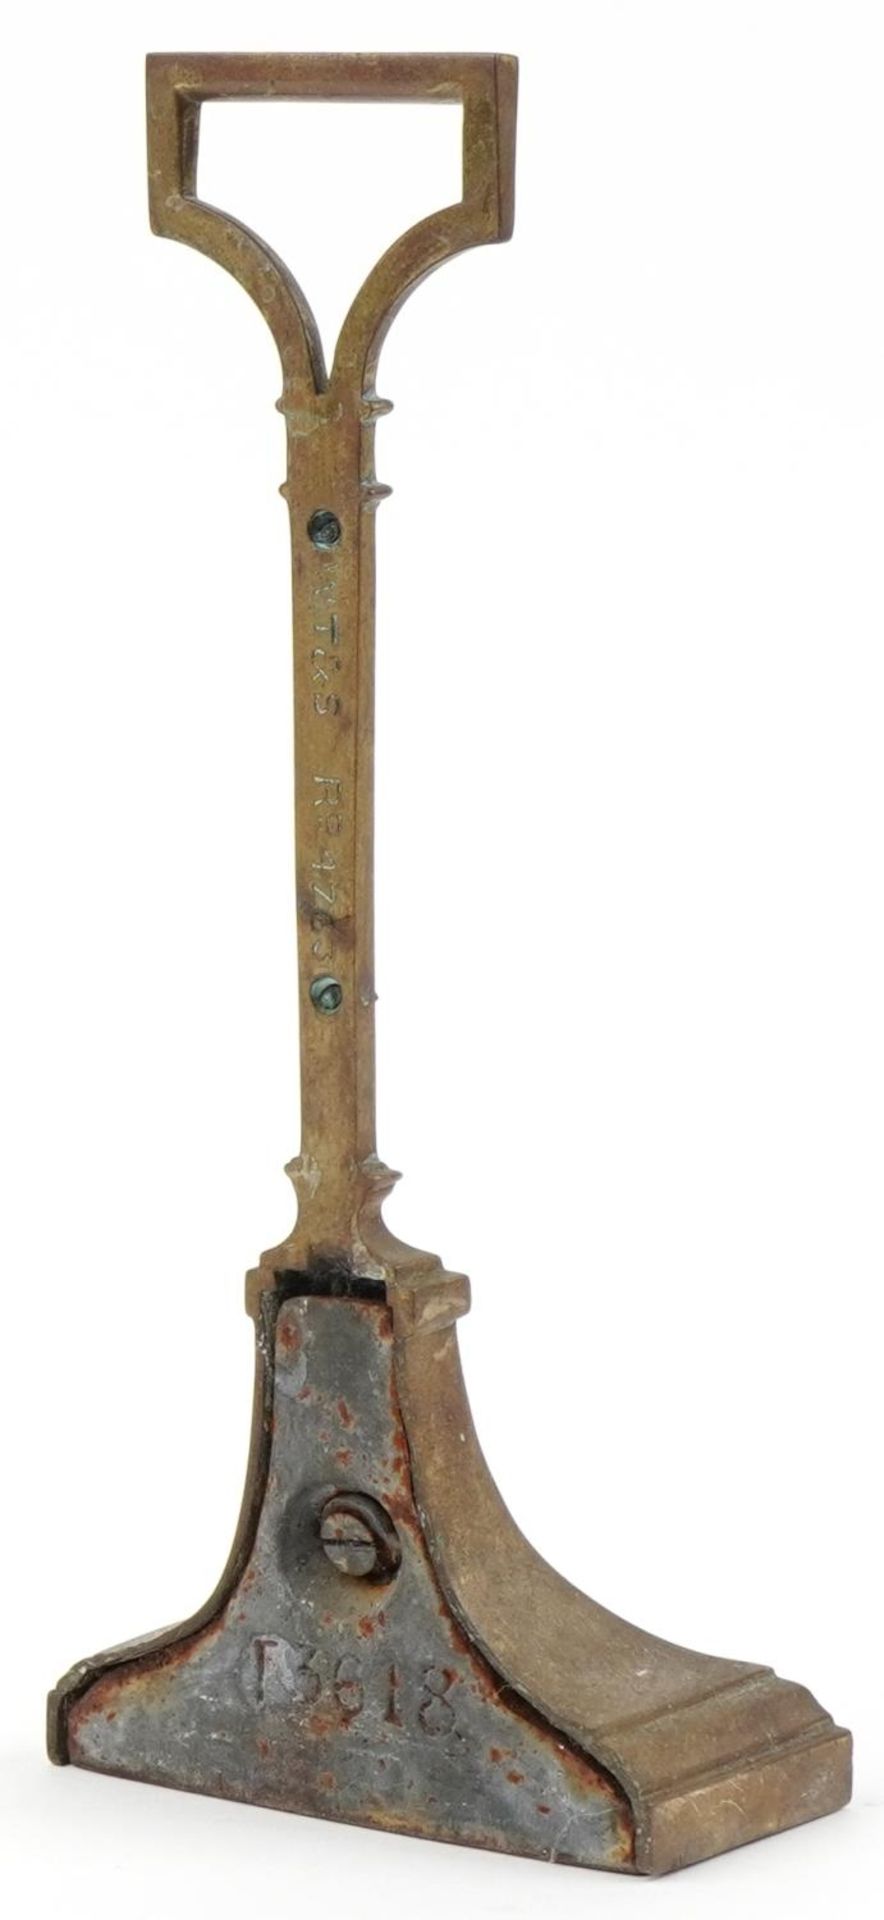 Antique bronzed doorstop by William Tonks & Sons, registration number 4763, 30cm high : For - Image 2 of 5